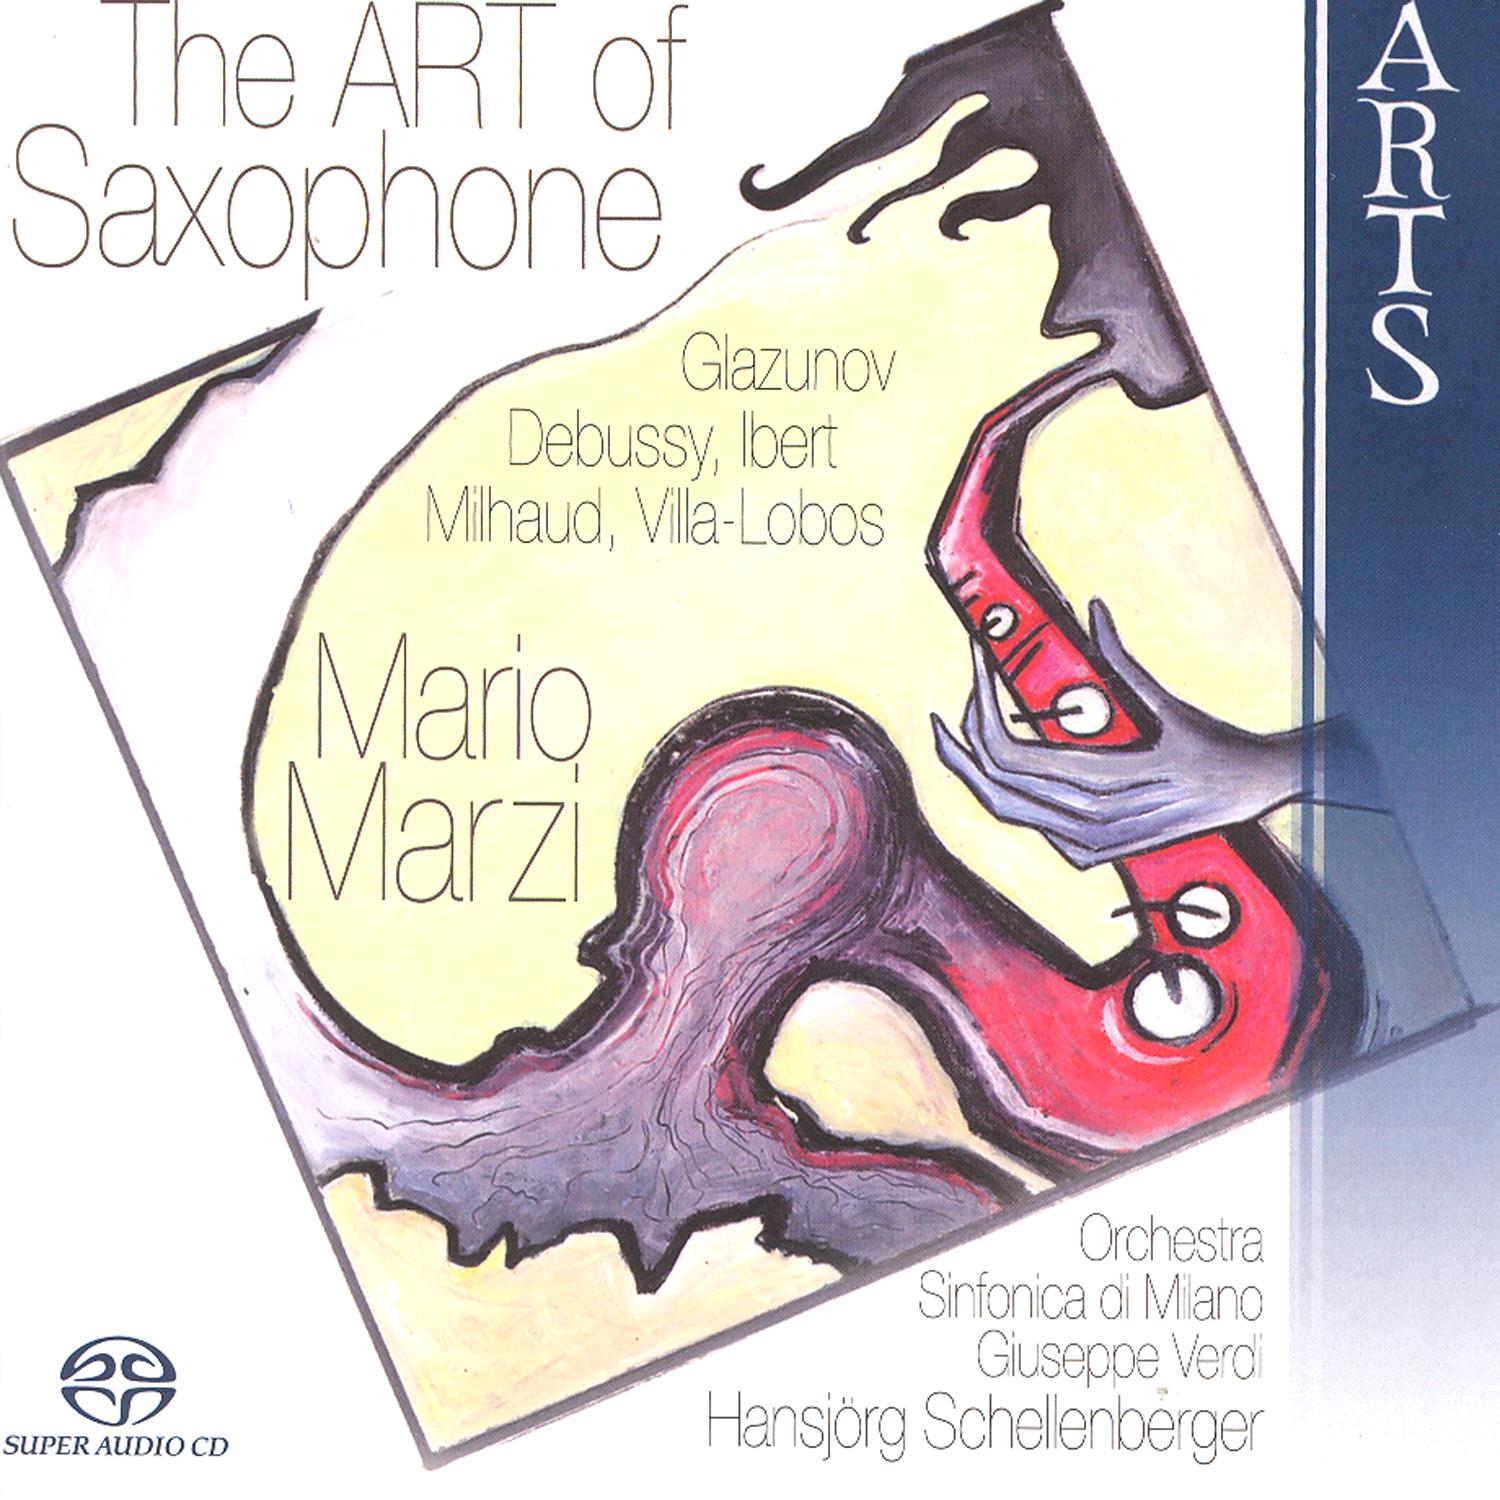 Scaramouche. Suite for saxophone and orchestra: Mode re